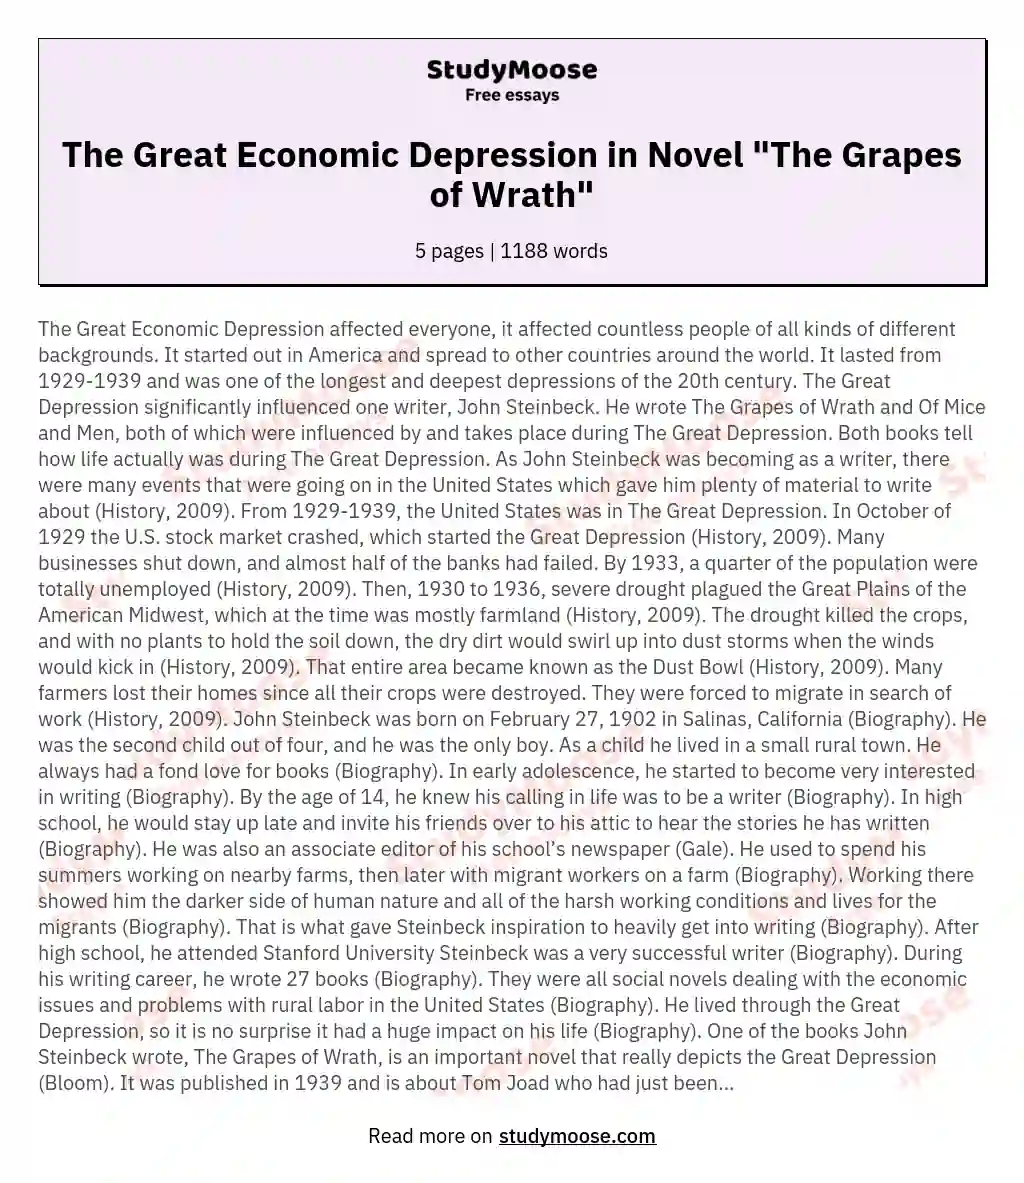 The Great Economic Depression in Novel "The Grapes of Wrath" essay